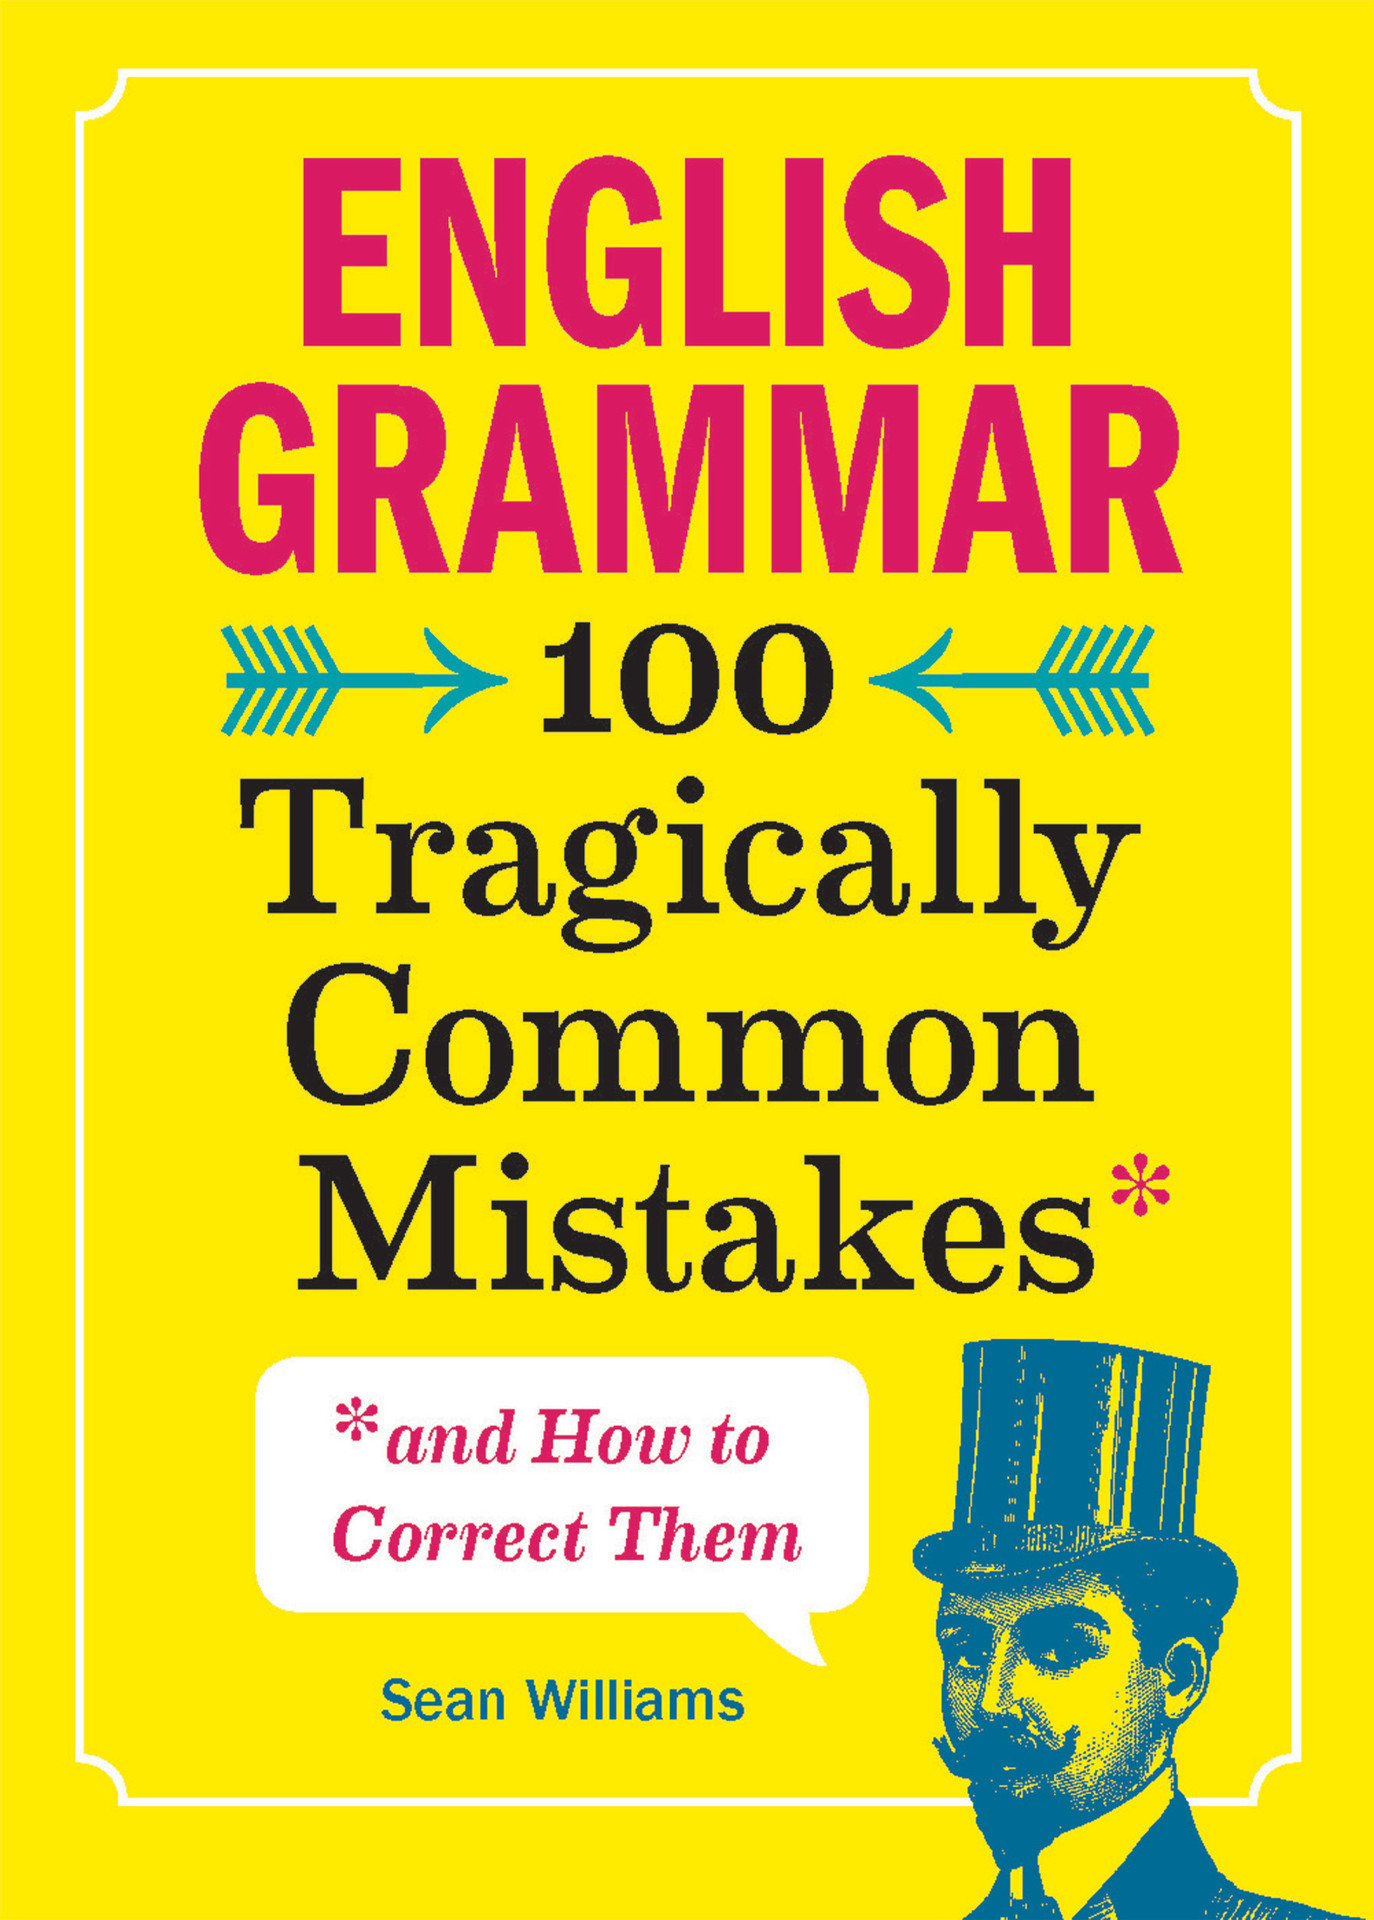 English Grammar: 100 Tragically Common Mistakes and How to Correct Them